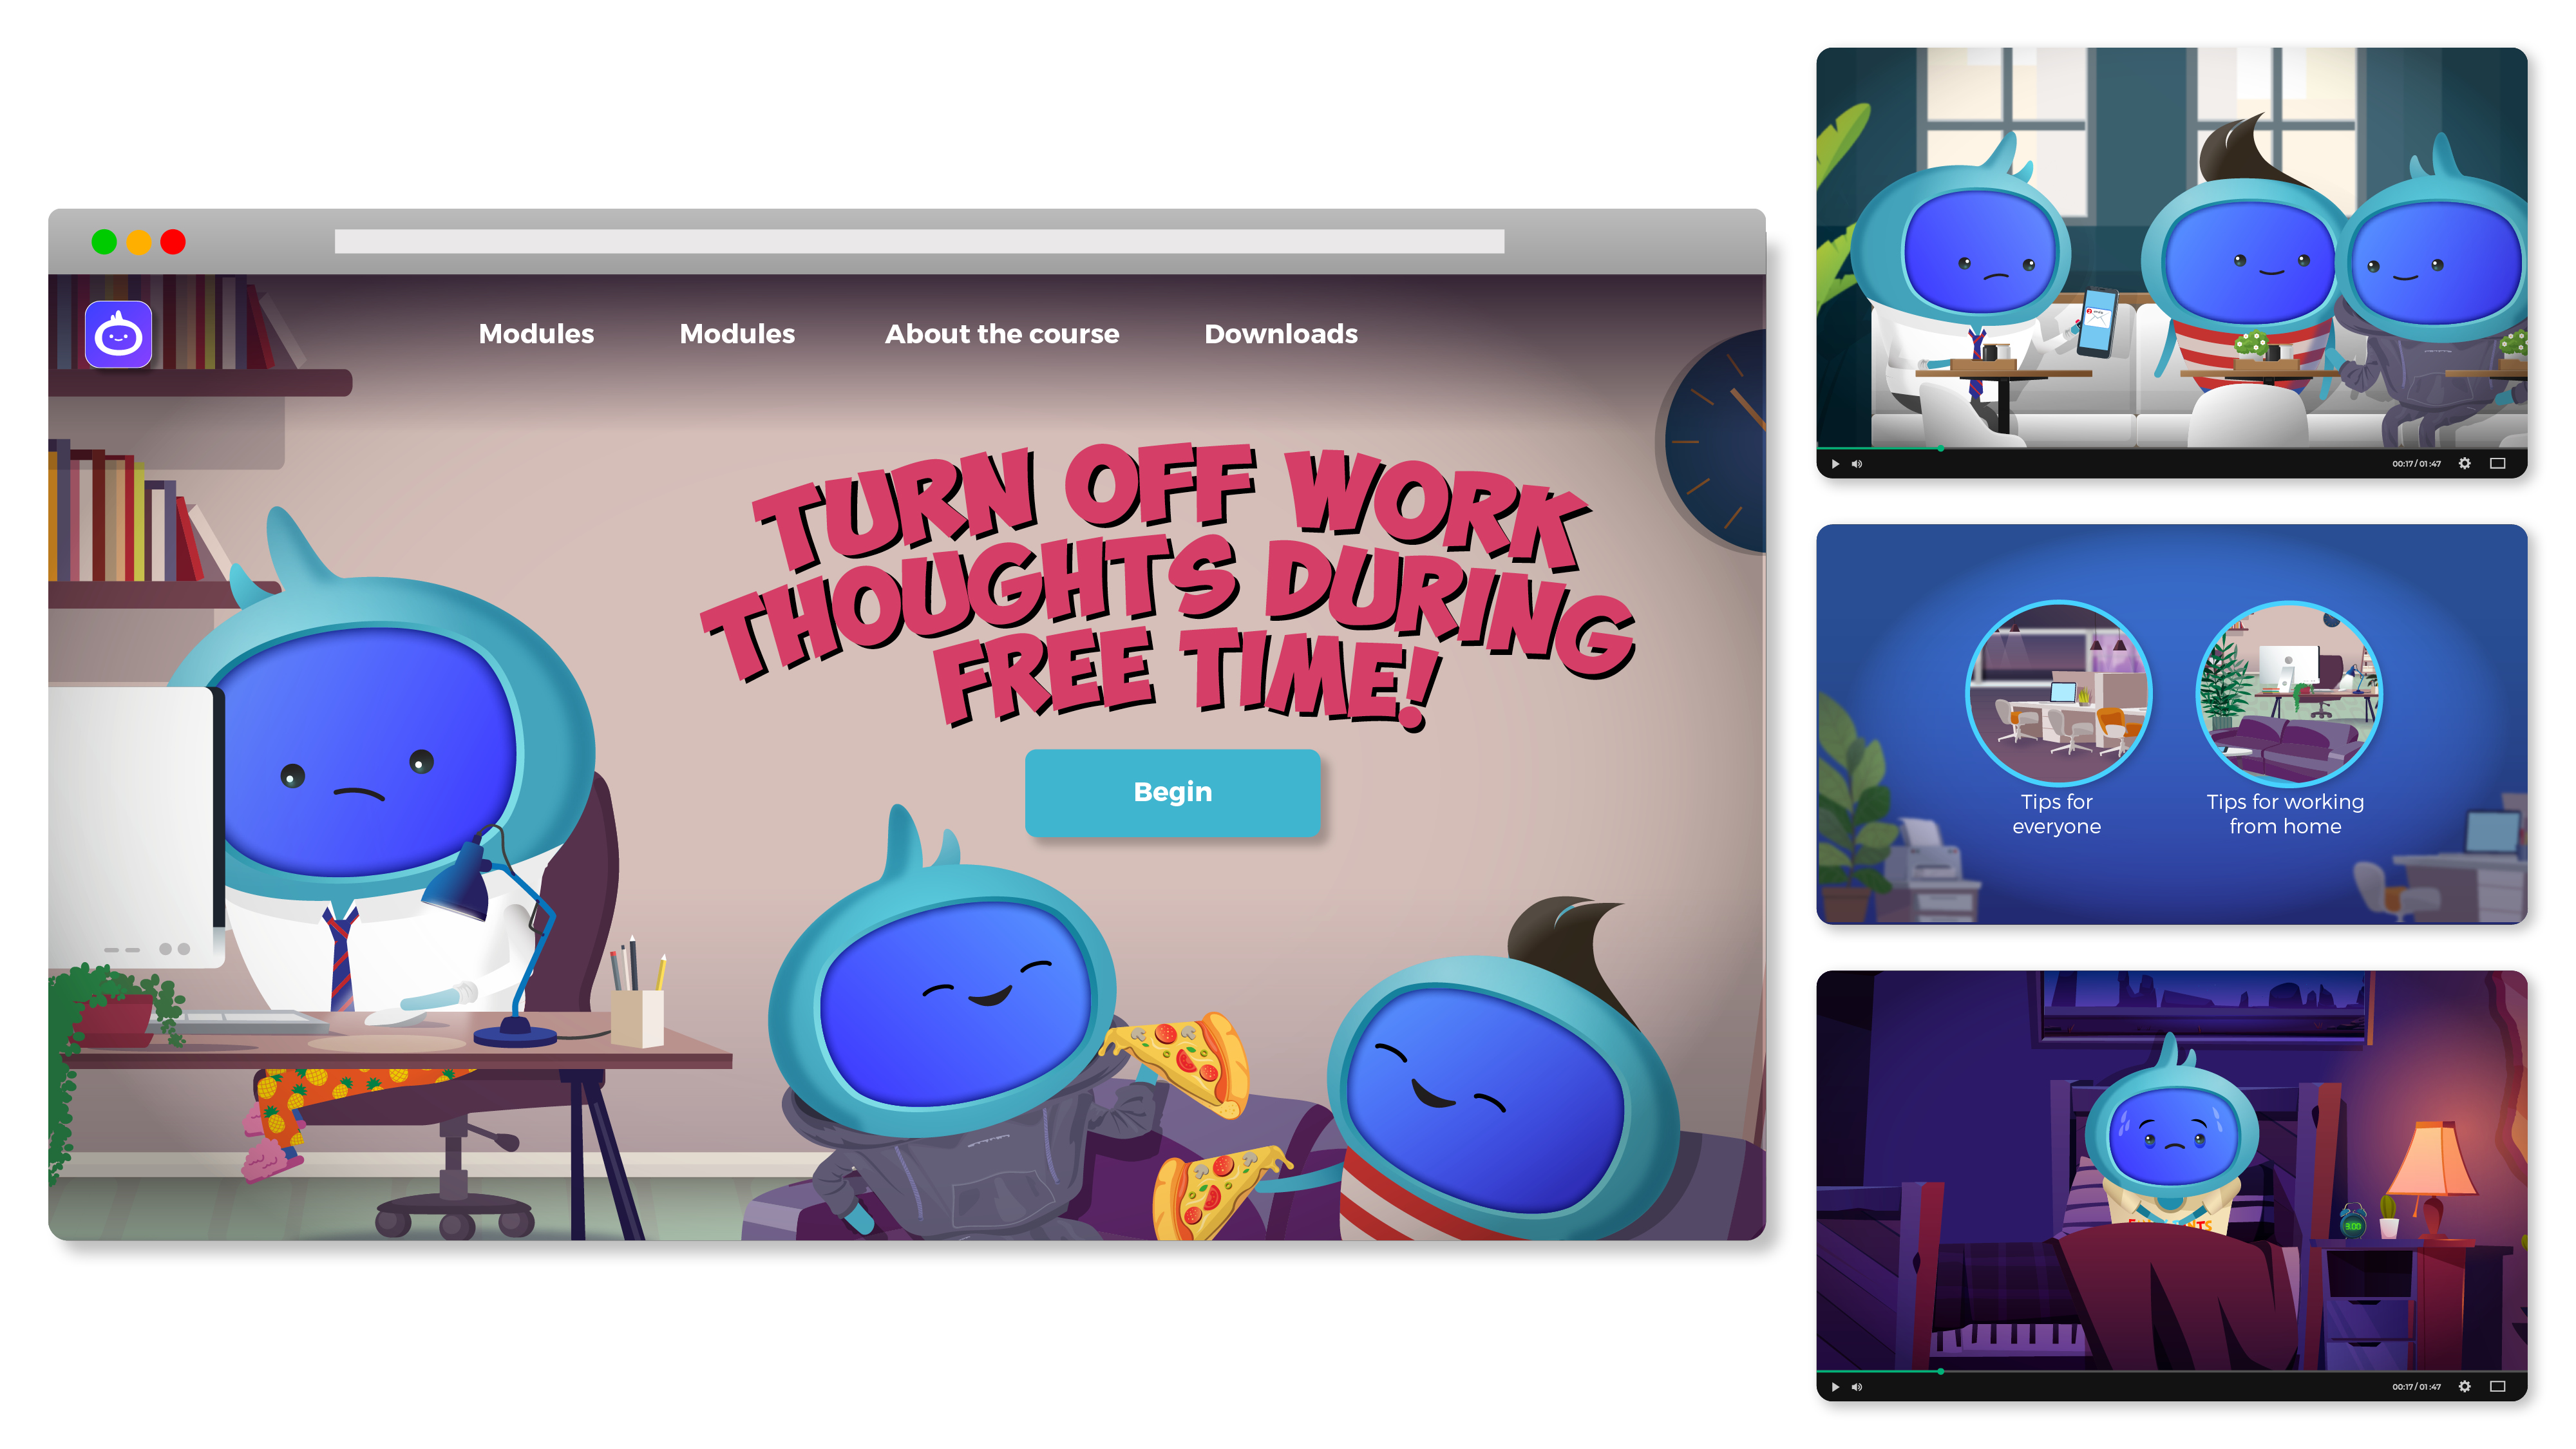 iAM Turn off Work Thoughts during Free Time! Landing Page Artwork Image 2